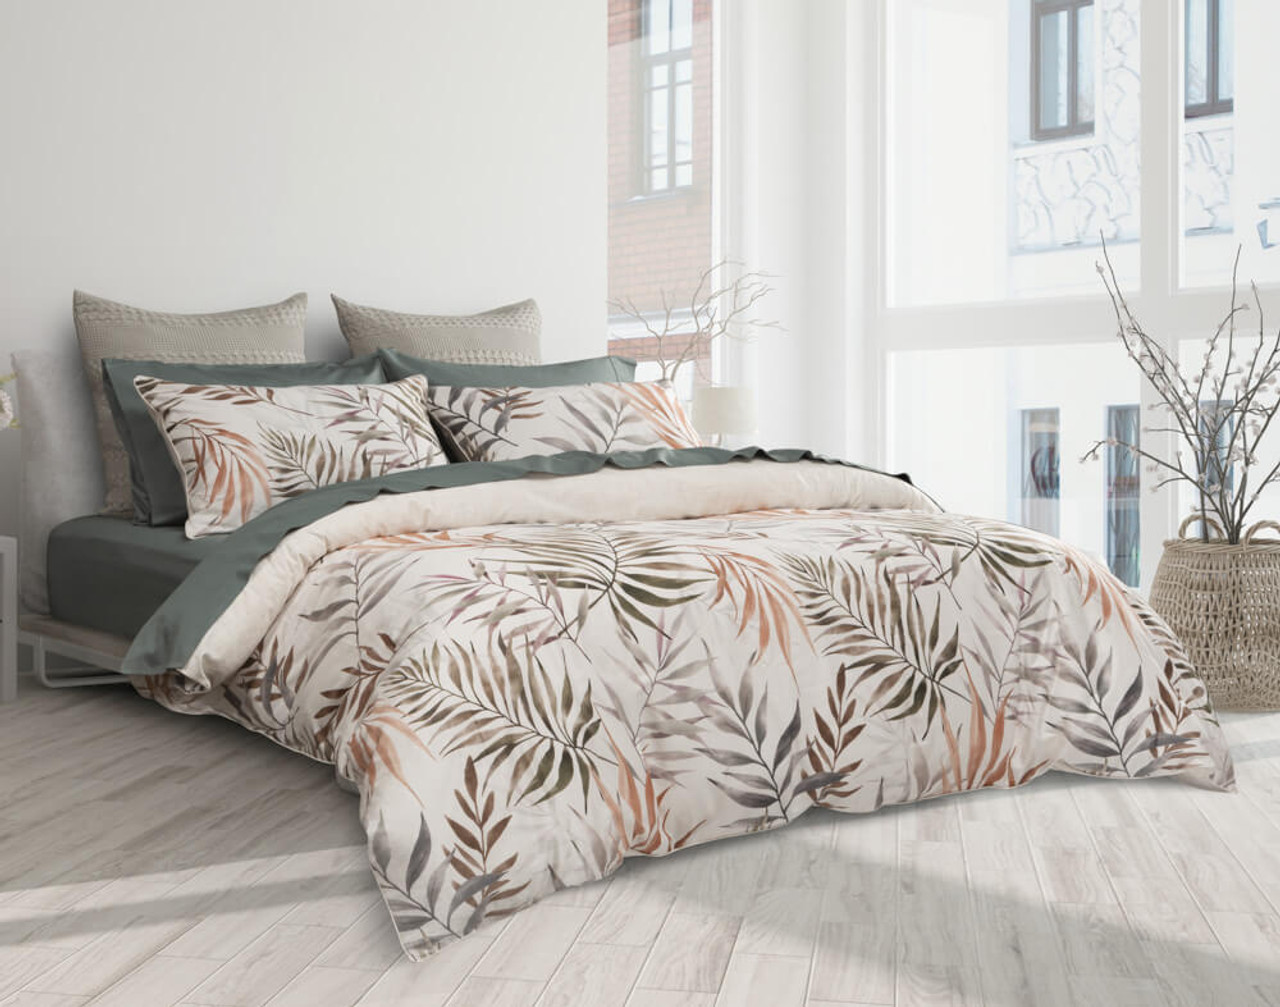 Our San Luca Duvet Cover with tropical frond design dressed over a bed with dark green sheets in a white bedroom.